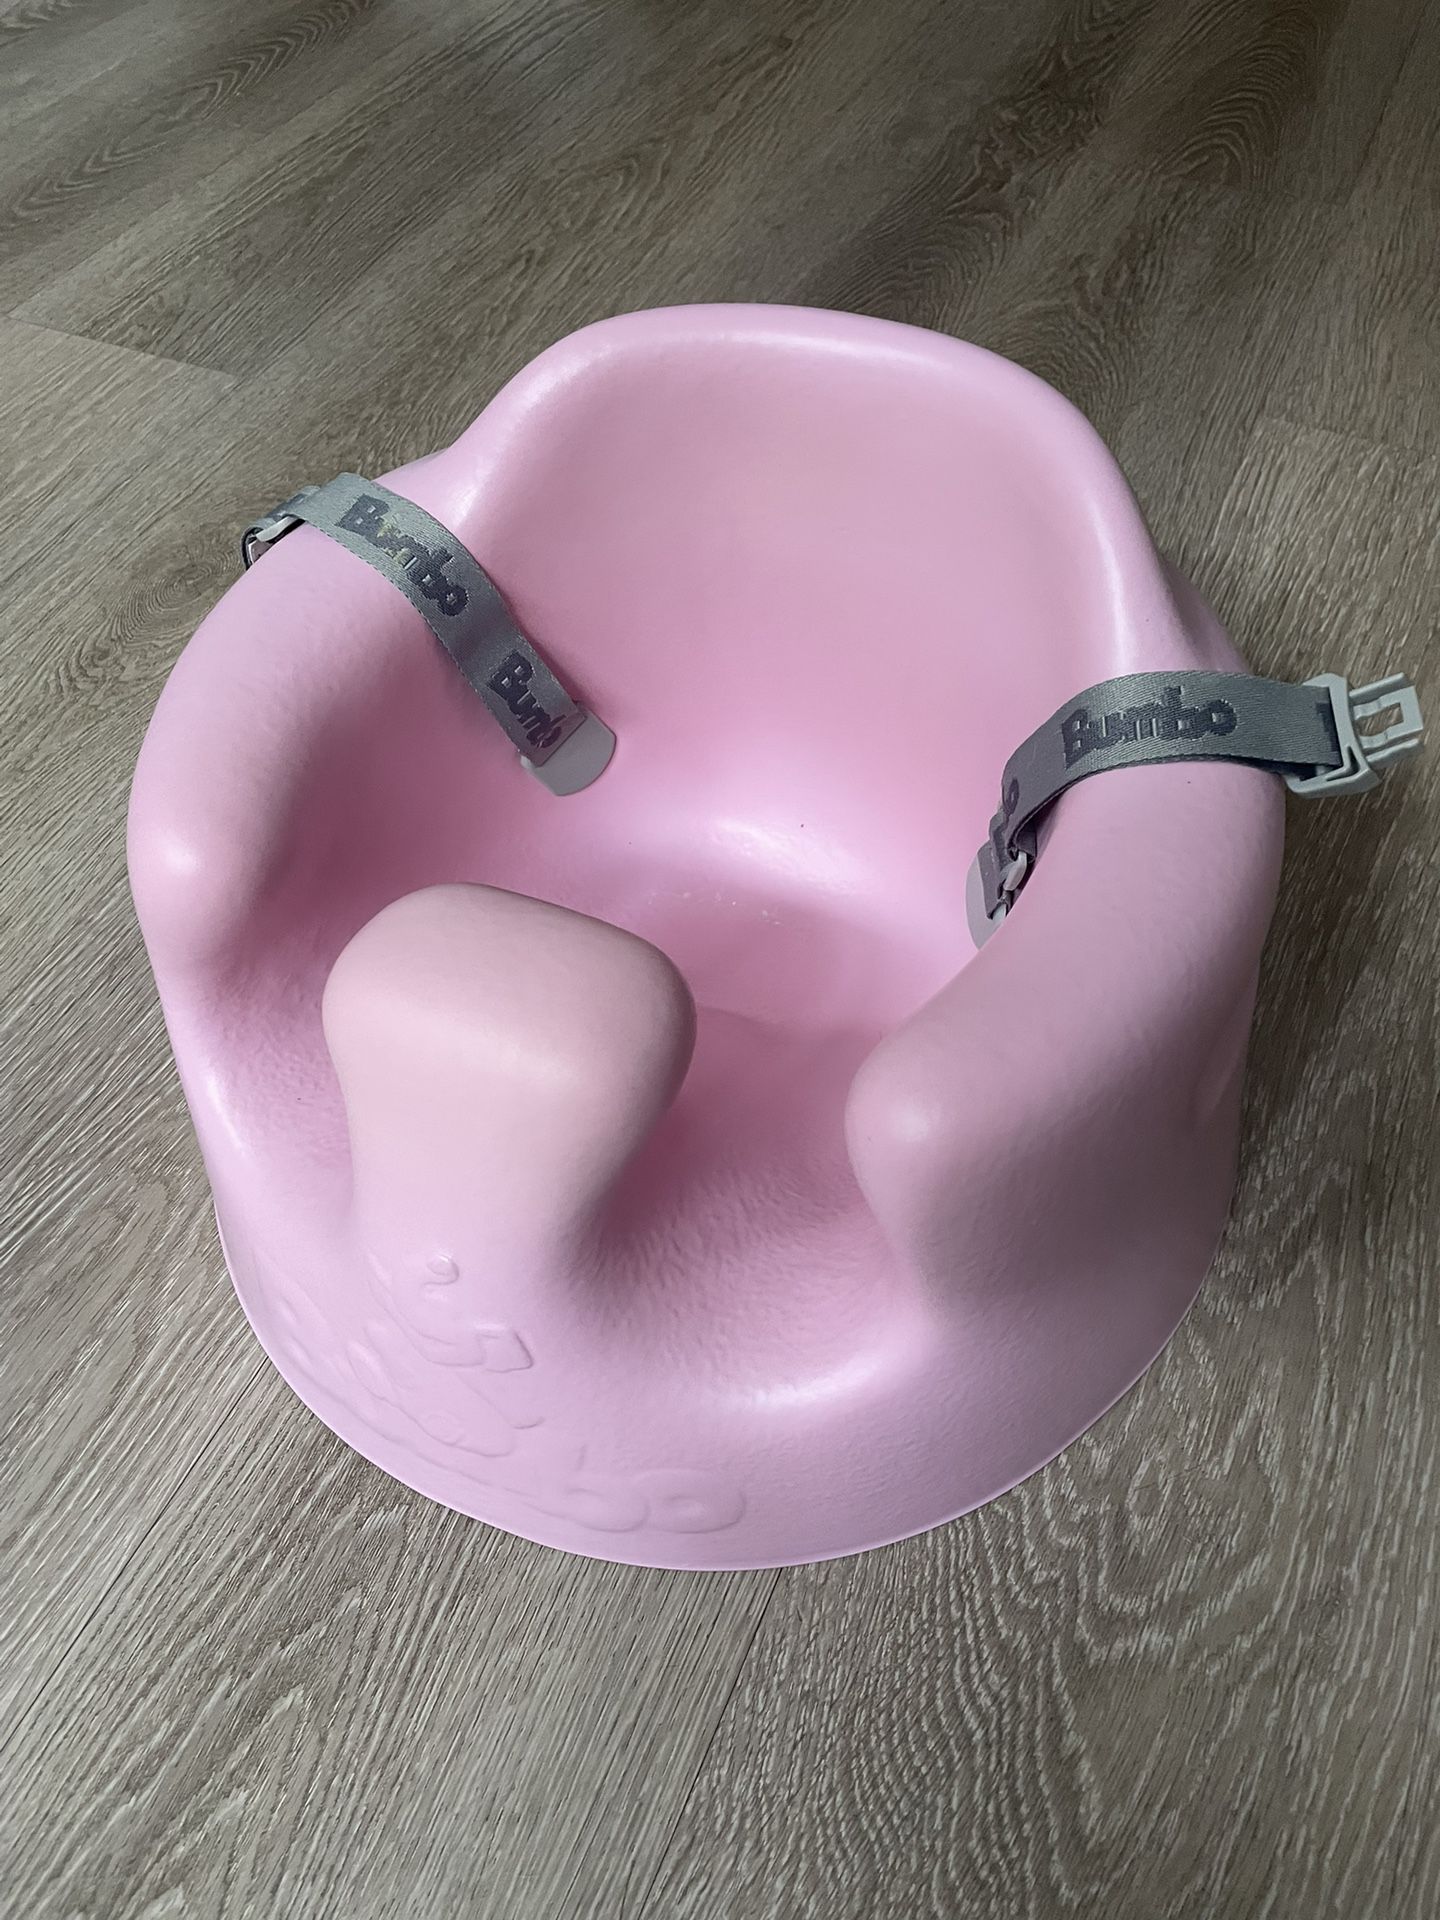 Bumbo Infant Support Seating